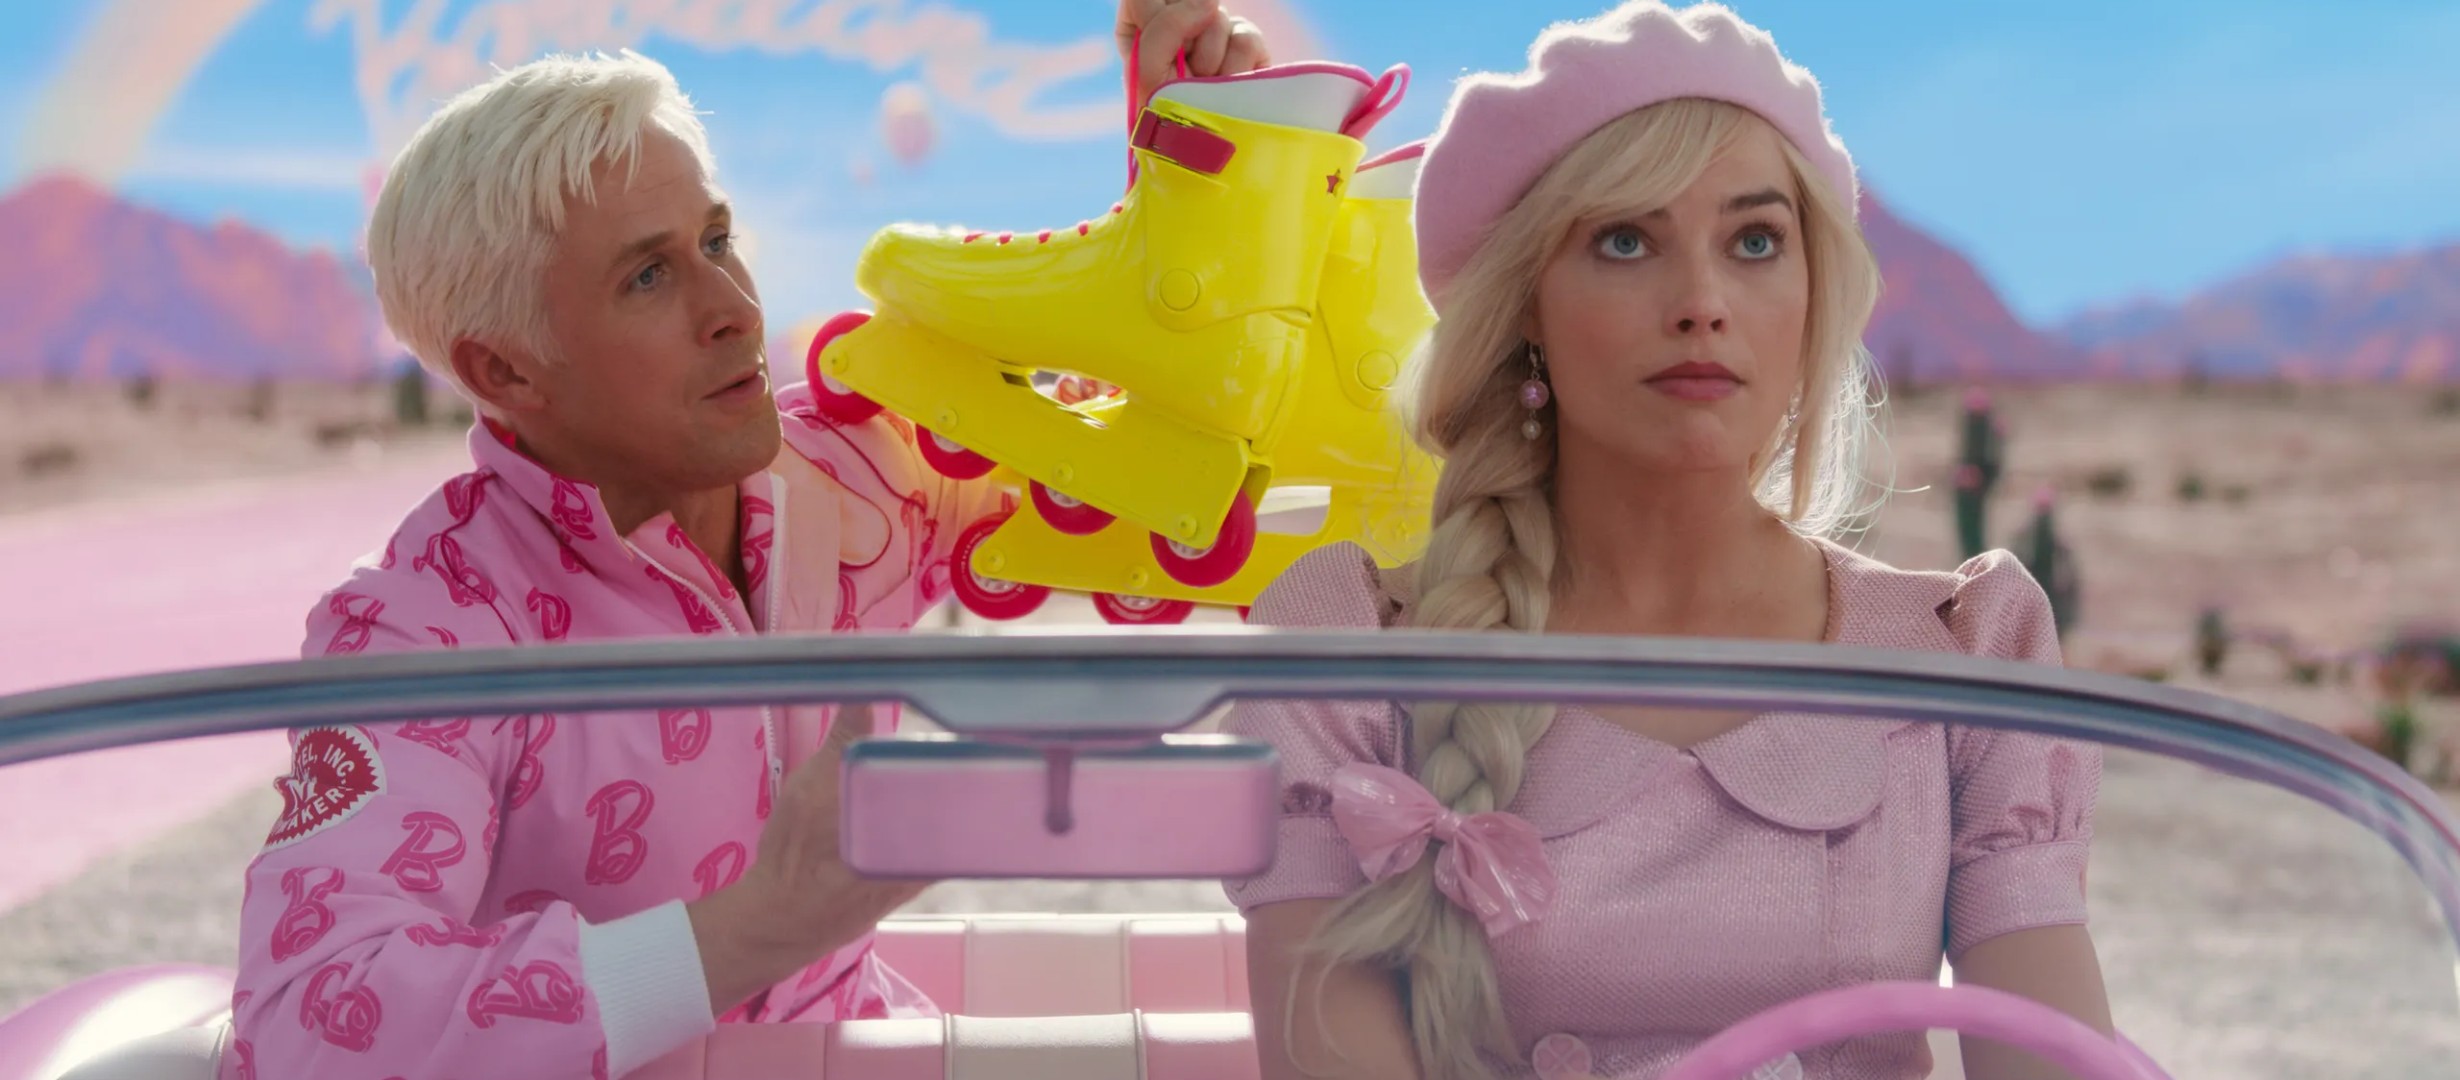 Margot Robbie as Barbie and Ryan Gosling as Ken. They are in a car and Ryan is showing Margot a pair of bright yellow roller skates 